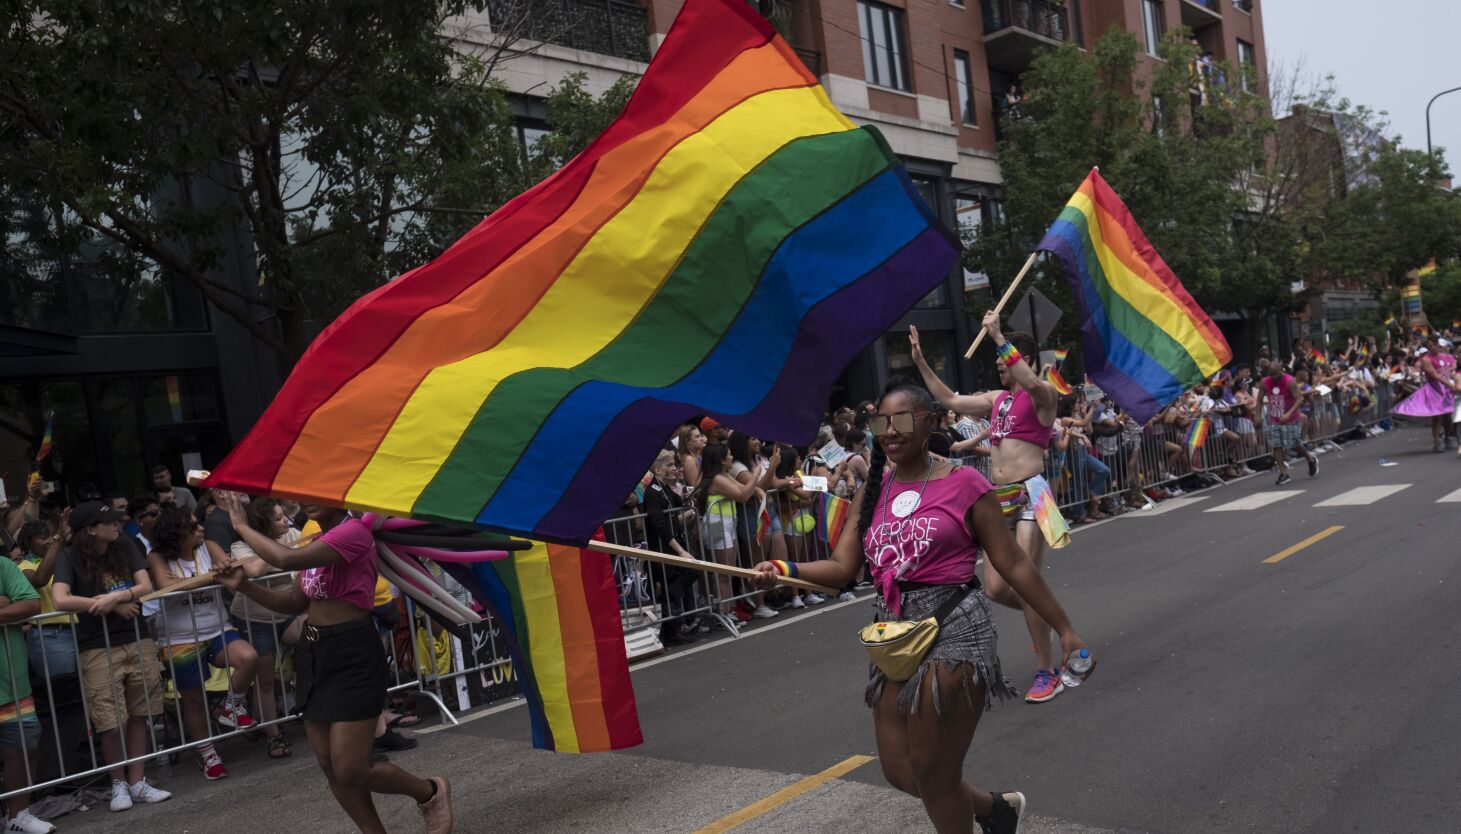 Chicago Pride Parade 2022 Back Sunday after a 2year hiatus, what you